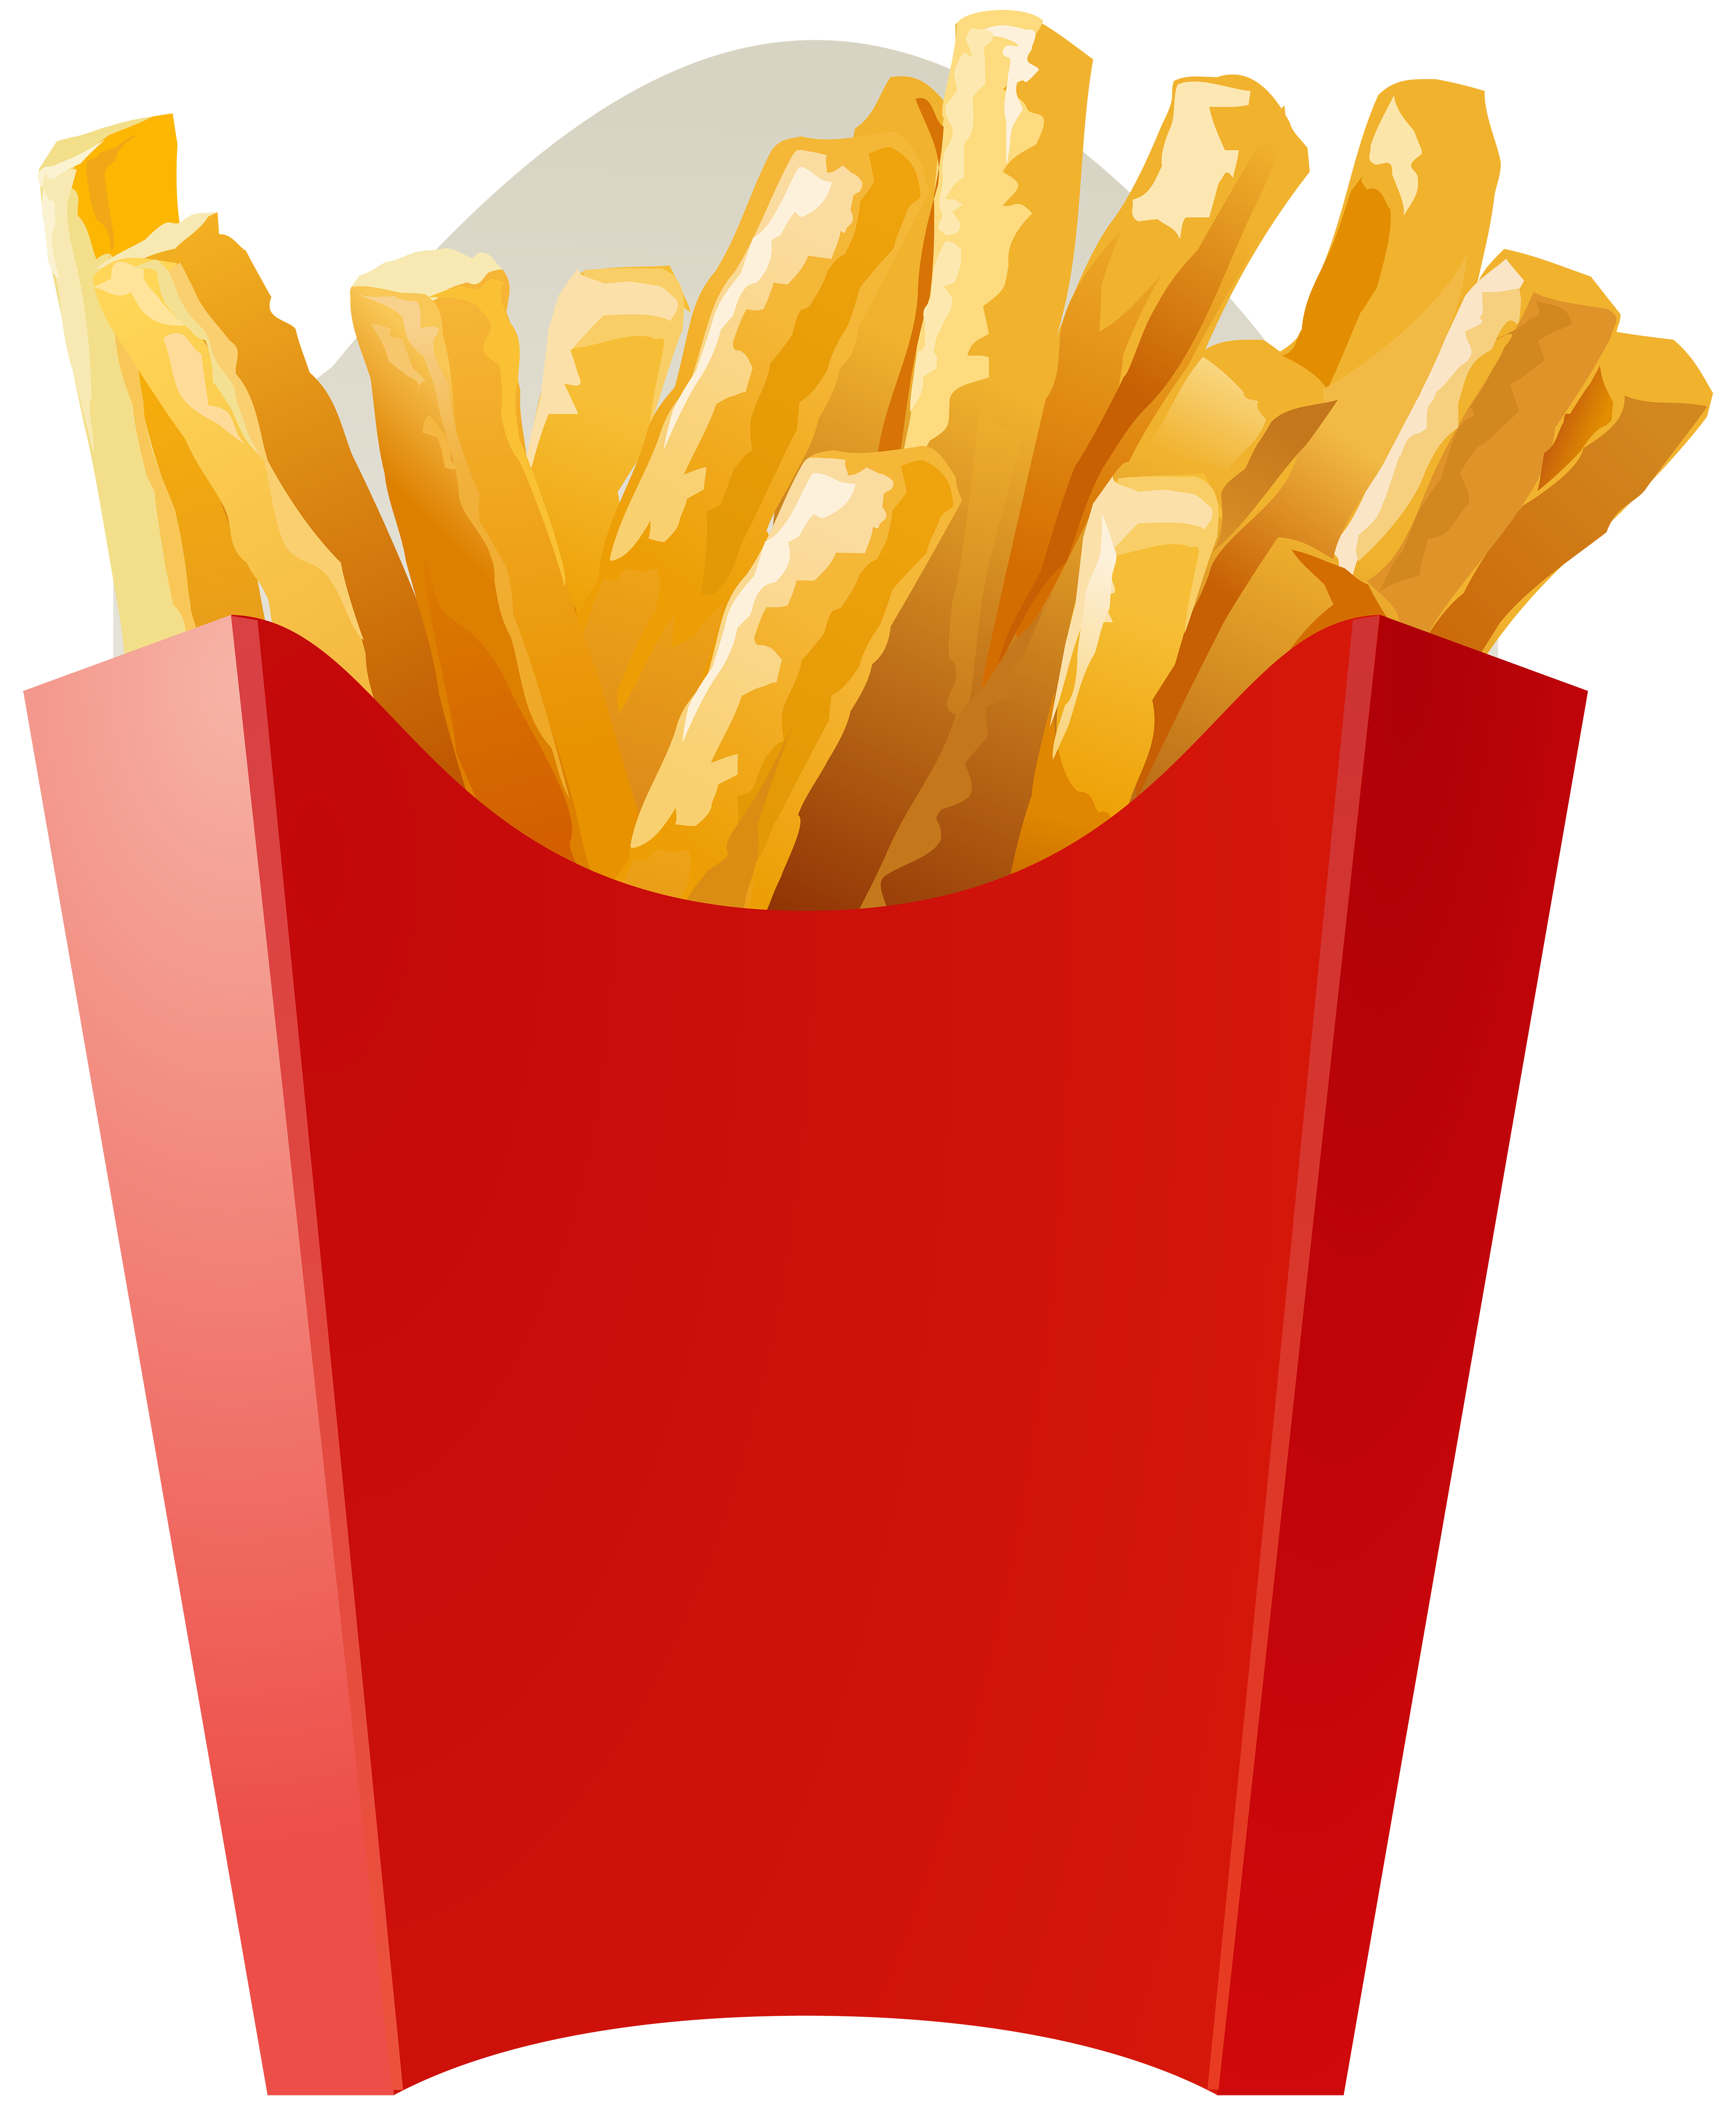 Mcdonalds clipart modern. French fries png clip